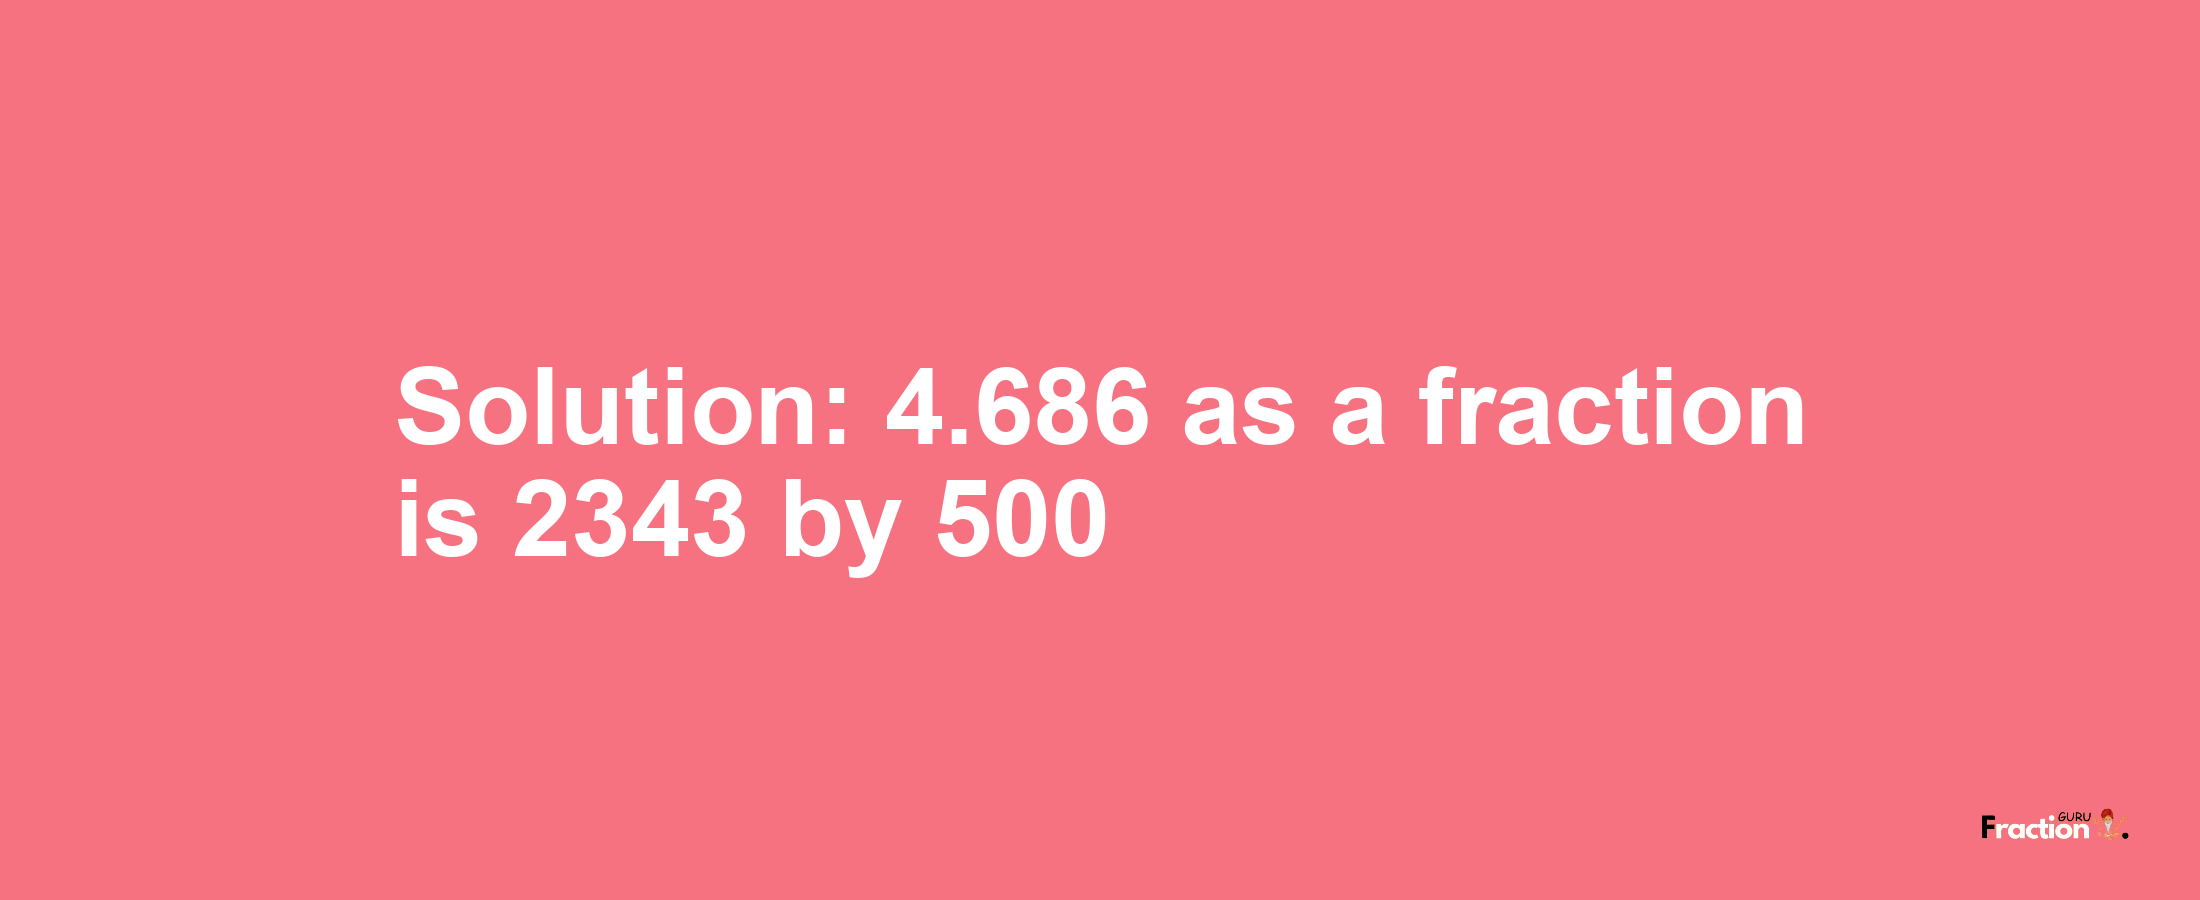 Solution:4.686 as a fraction is 2343/500